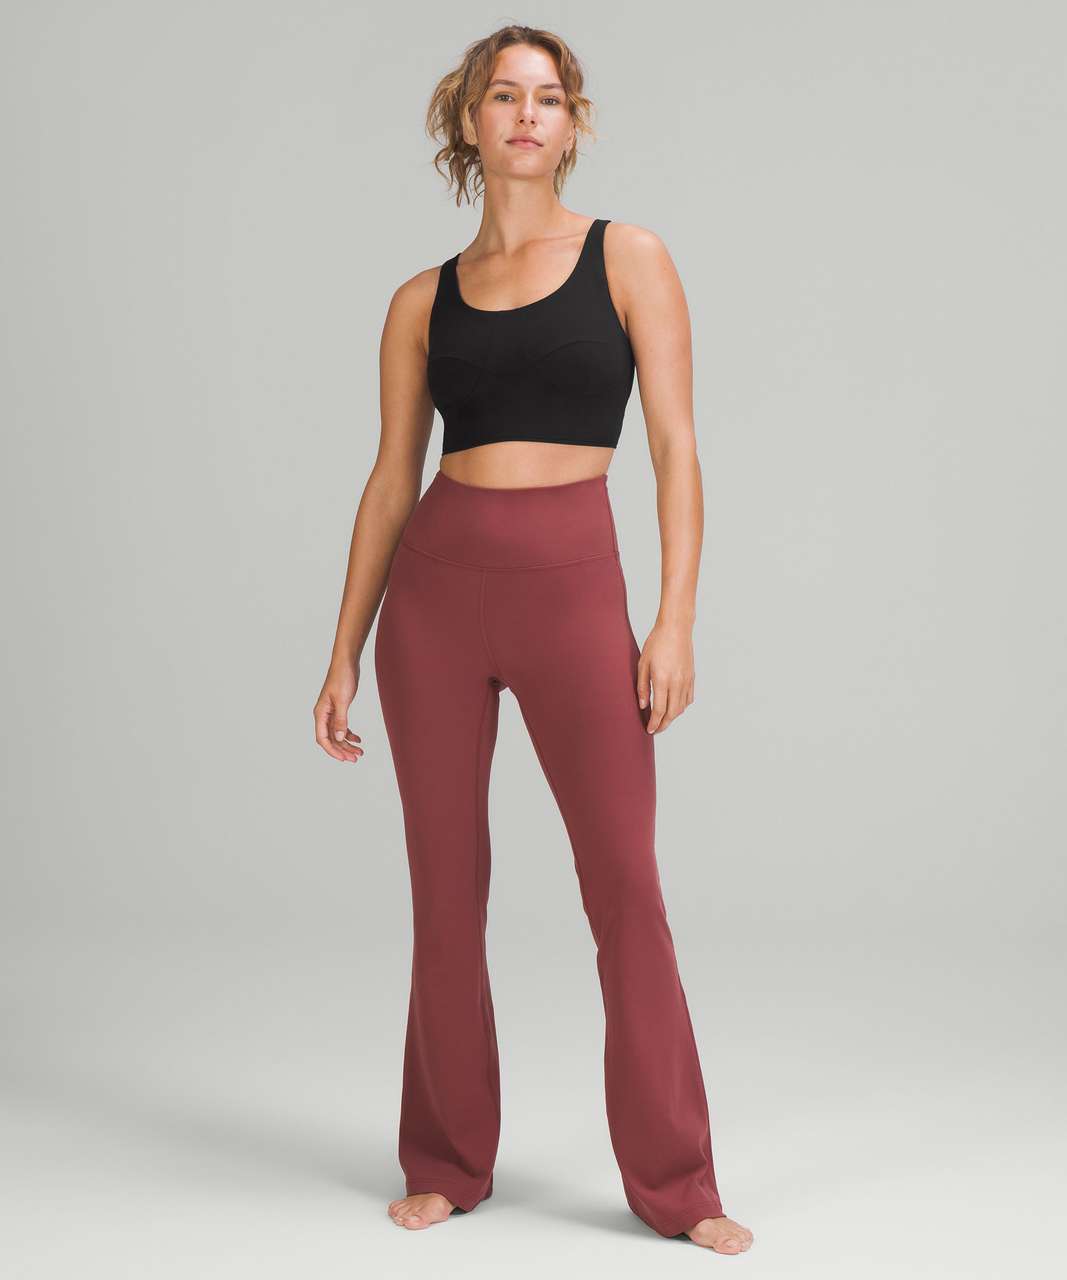 Lululemon Nulu Front-Gather Yoga Bra Prosecco Size 6 - $49 - From The